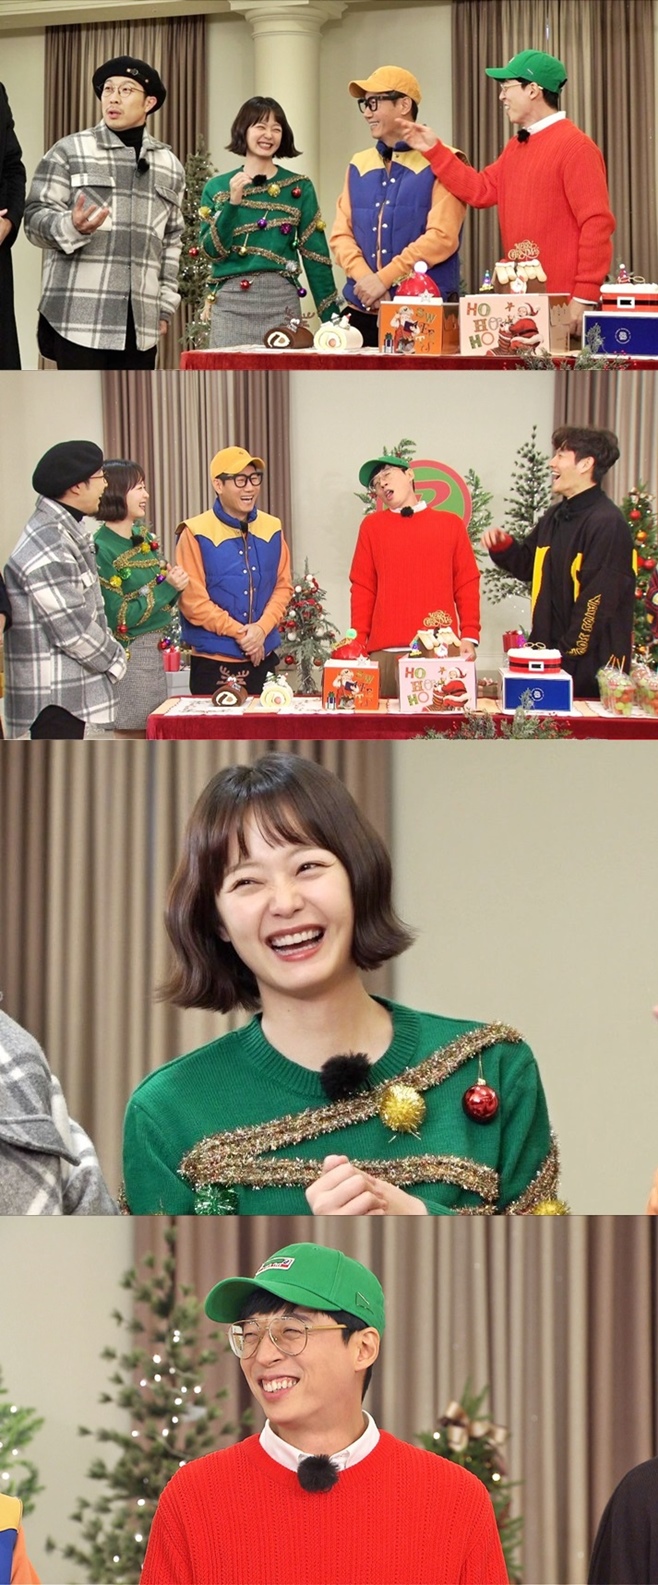 Running Man Yoo Jae-Suk Disclosures Jeon So-mins humiliationThe SBS entertainment program Running Man, which is broadcasted on the 23rd, is decorated with a Christmas special.In the previous shoot, Jeon So-min appeared in costumes reminiscent of a tree, and focused on the members attention.But the warm Christmas atmosphere also became a Super fun for a while, in the lively Jeon So-min humiliation description of Yoo Jae-Suk.Yoo Jae-Suk, who was waiting in the car ahead of the shooting, found a vehicle of Jeon So-min and was happy to drop down Facing Windows and greet him.The manager of Jeon So-min opened the Facing Windows in the back seat, but the appearance of Jeon So-min, seen by Yoo Jae-Suk, was sleeping in a defenseless state with his mouth open.Yoo Jae-Suk, who captured the figure, laughed realistically as he pretended to be sleeping with his mouth open.So, Jeon So-min said that he was tired of busy schedule these days, but he finally accepted the same look of Yoo Jae-Suk and made another laugh.